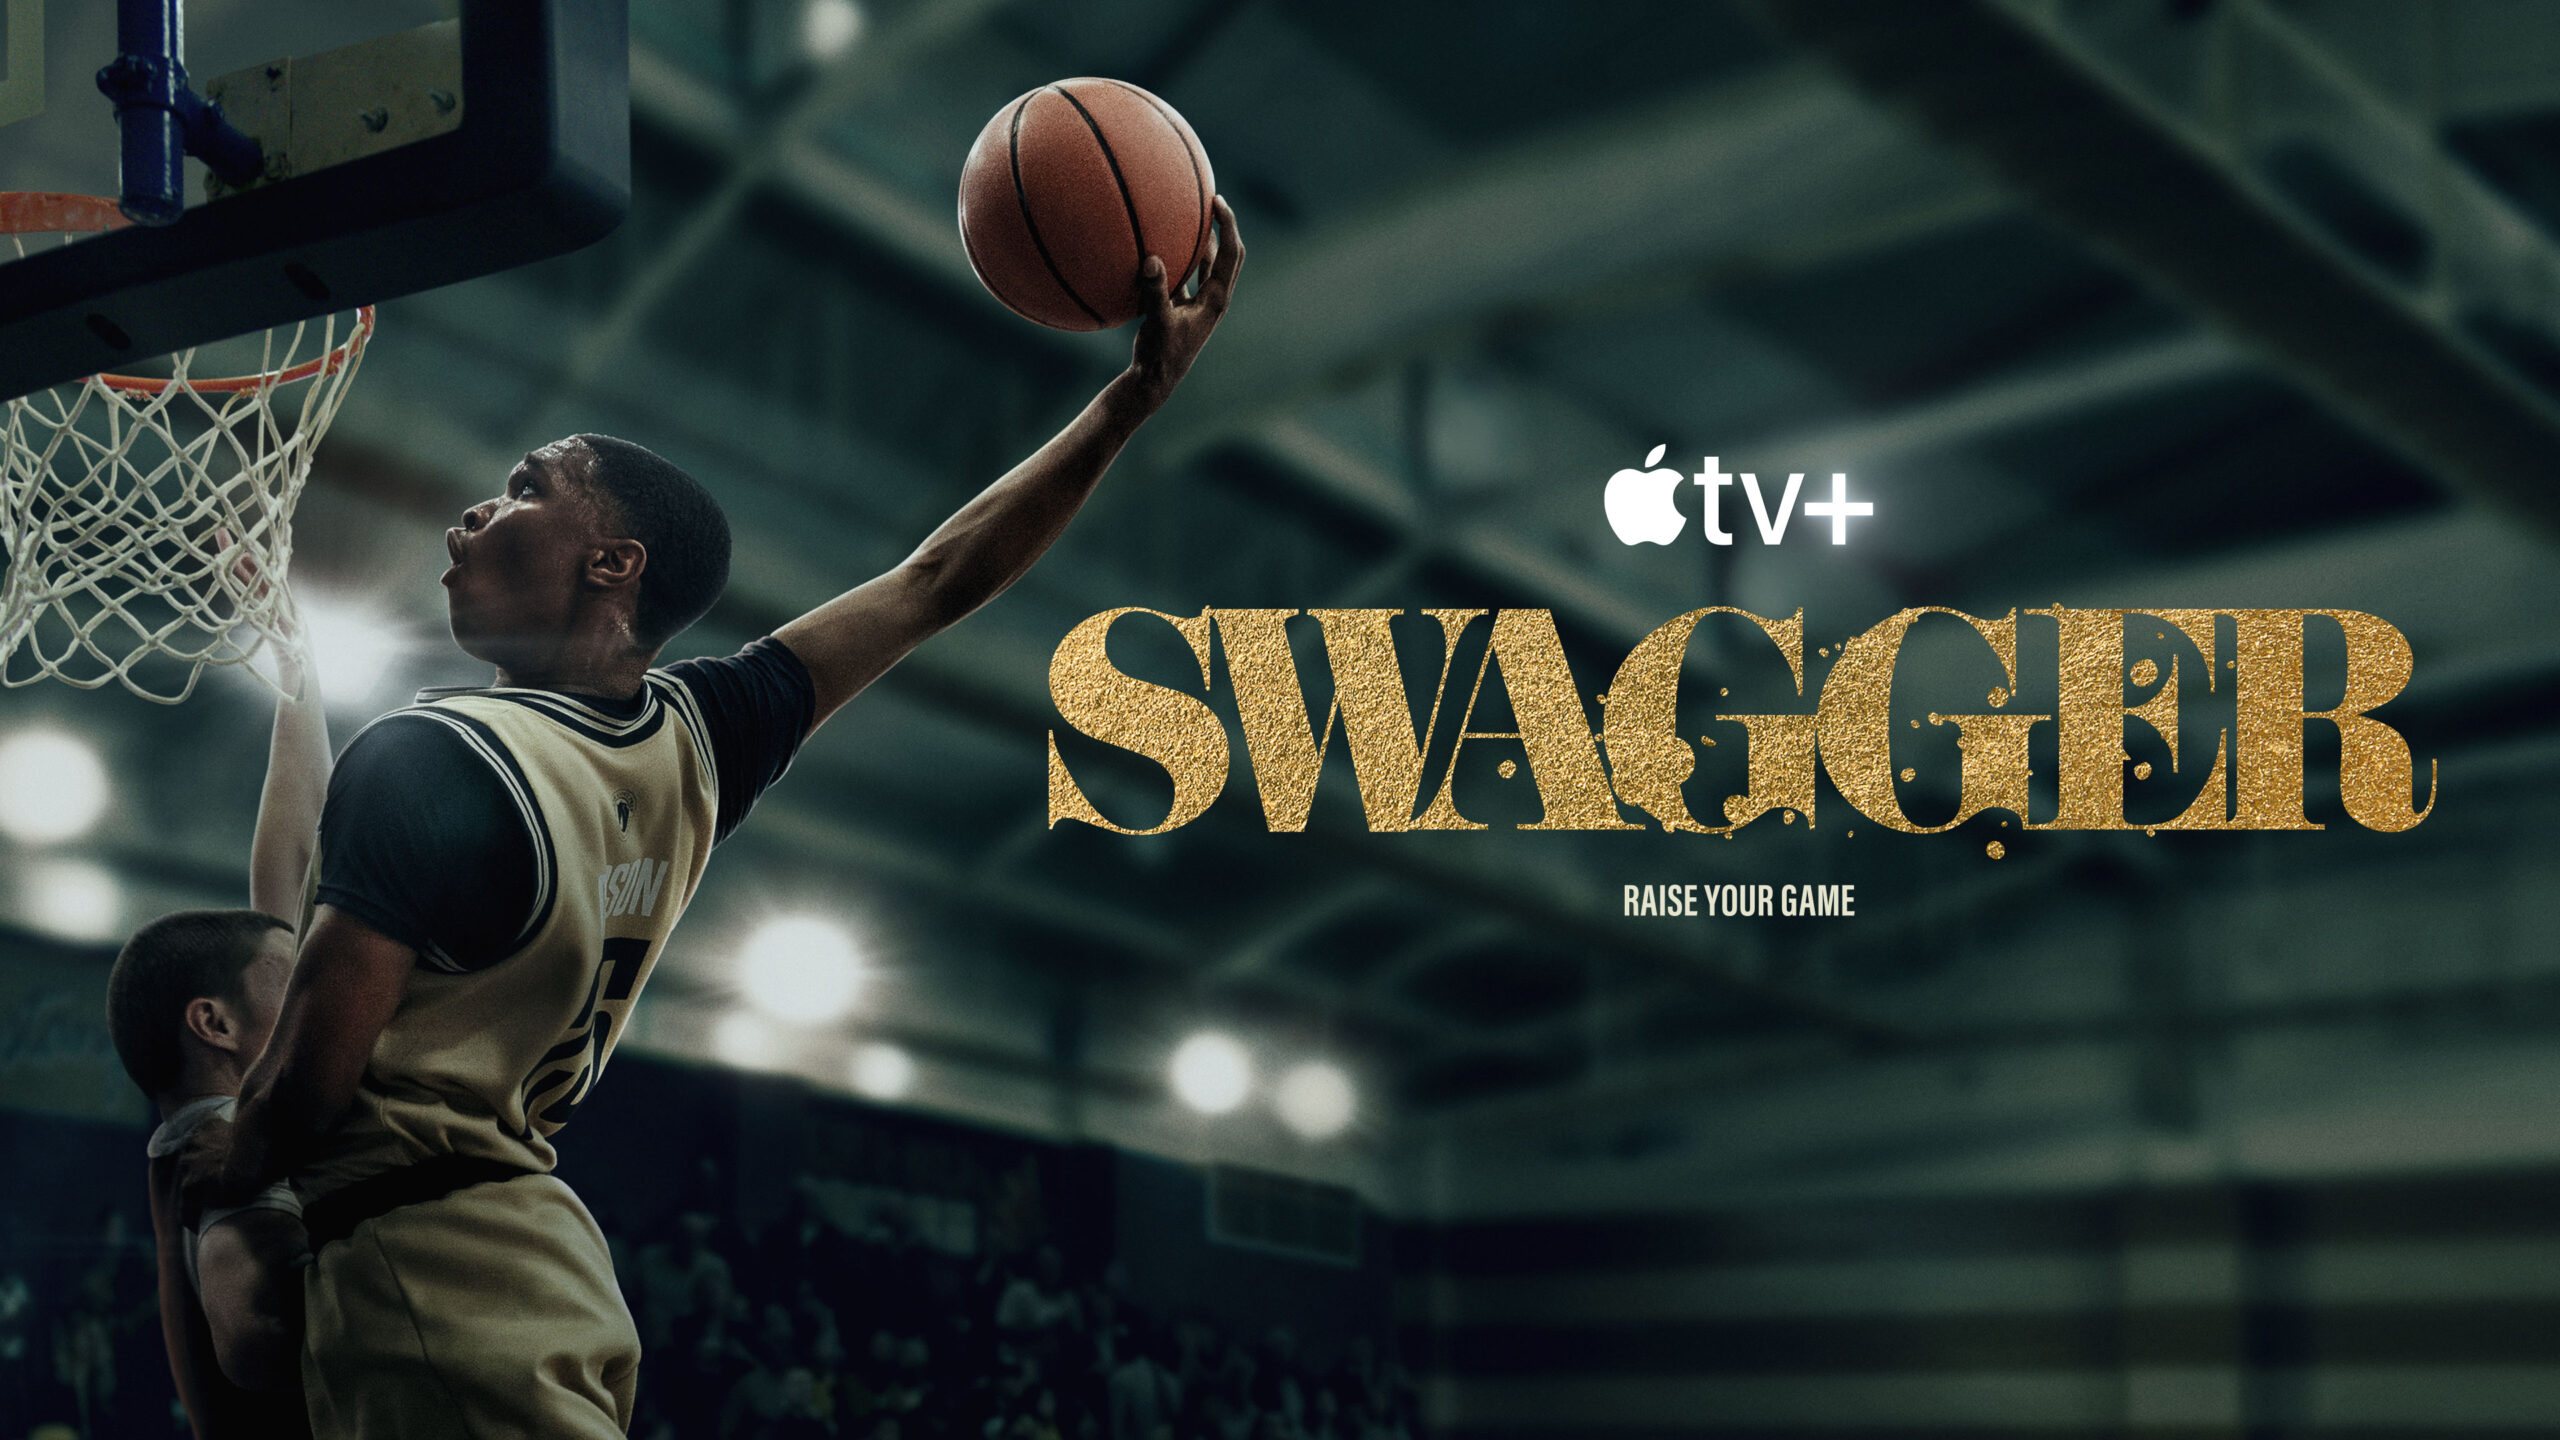 Swagger - Poster 2a stagione [credit: courtesy of Apple]